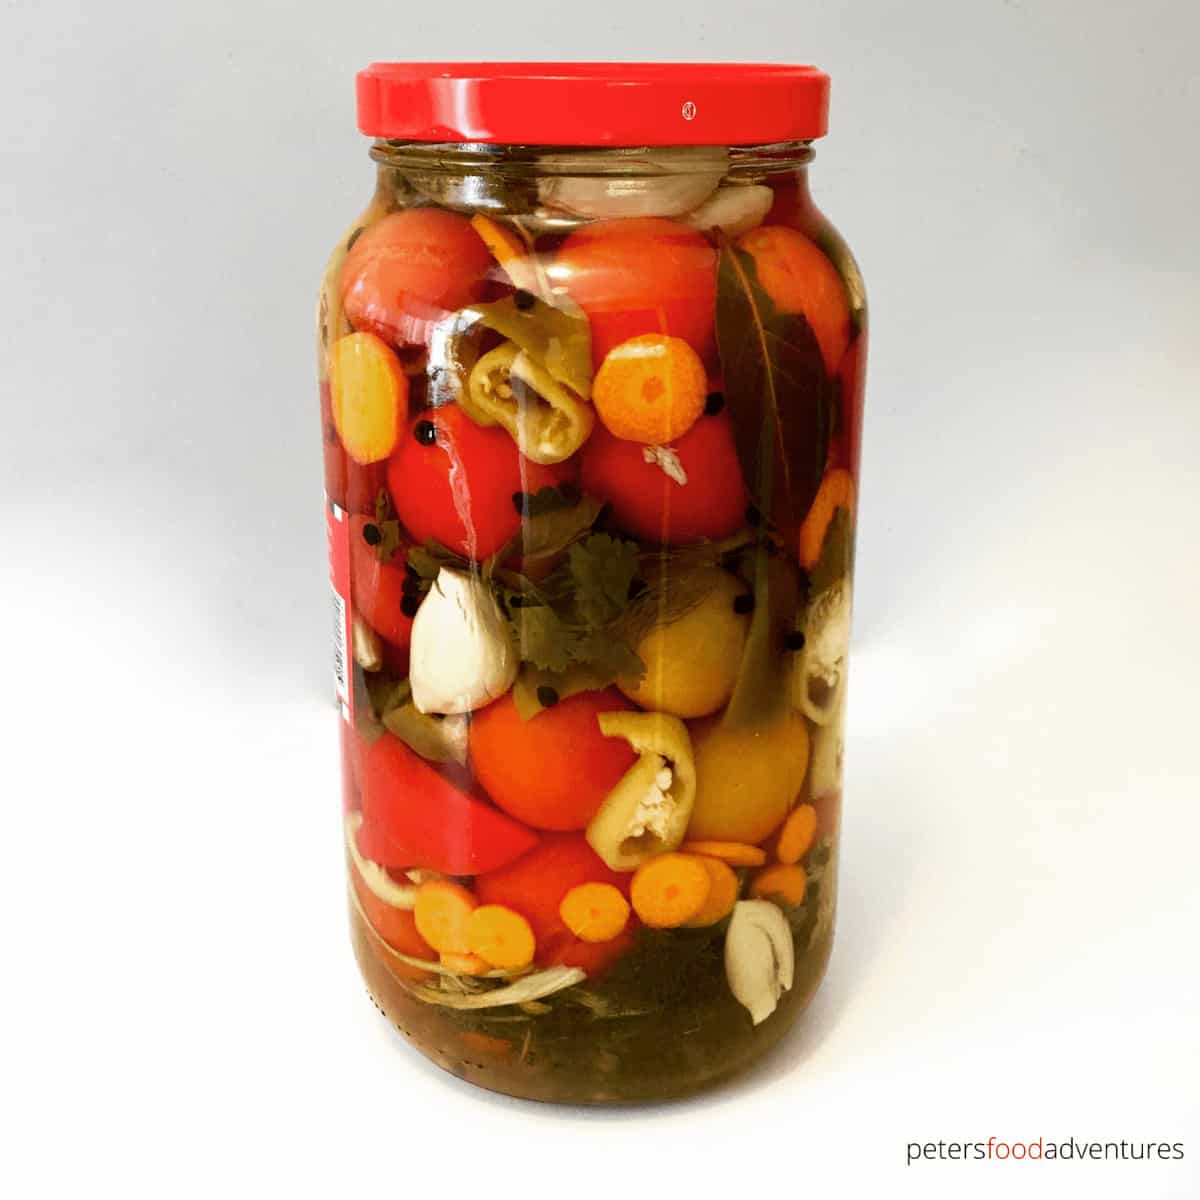 Enjoy your fresh, garden tomatoes by preserving them Russian-style. Pickled Tomatoes (солёные помидоры) with garlic and fresh herbs. I stuff extra vegetables between the tomatoes to make pickled vegetables too. These canned tomatoes are a staple year round.